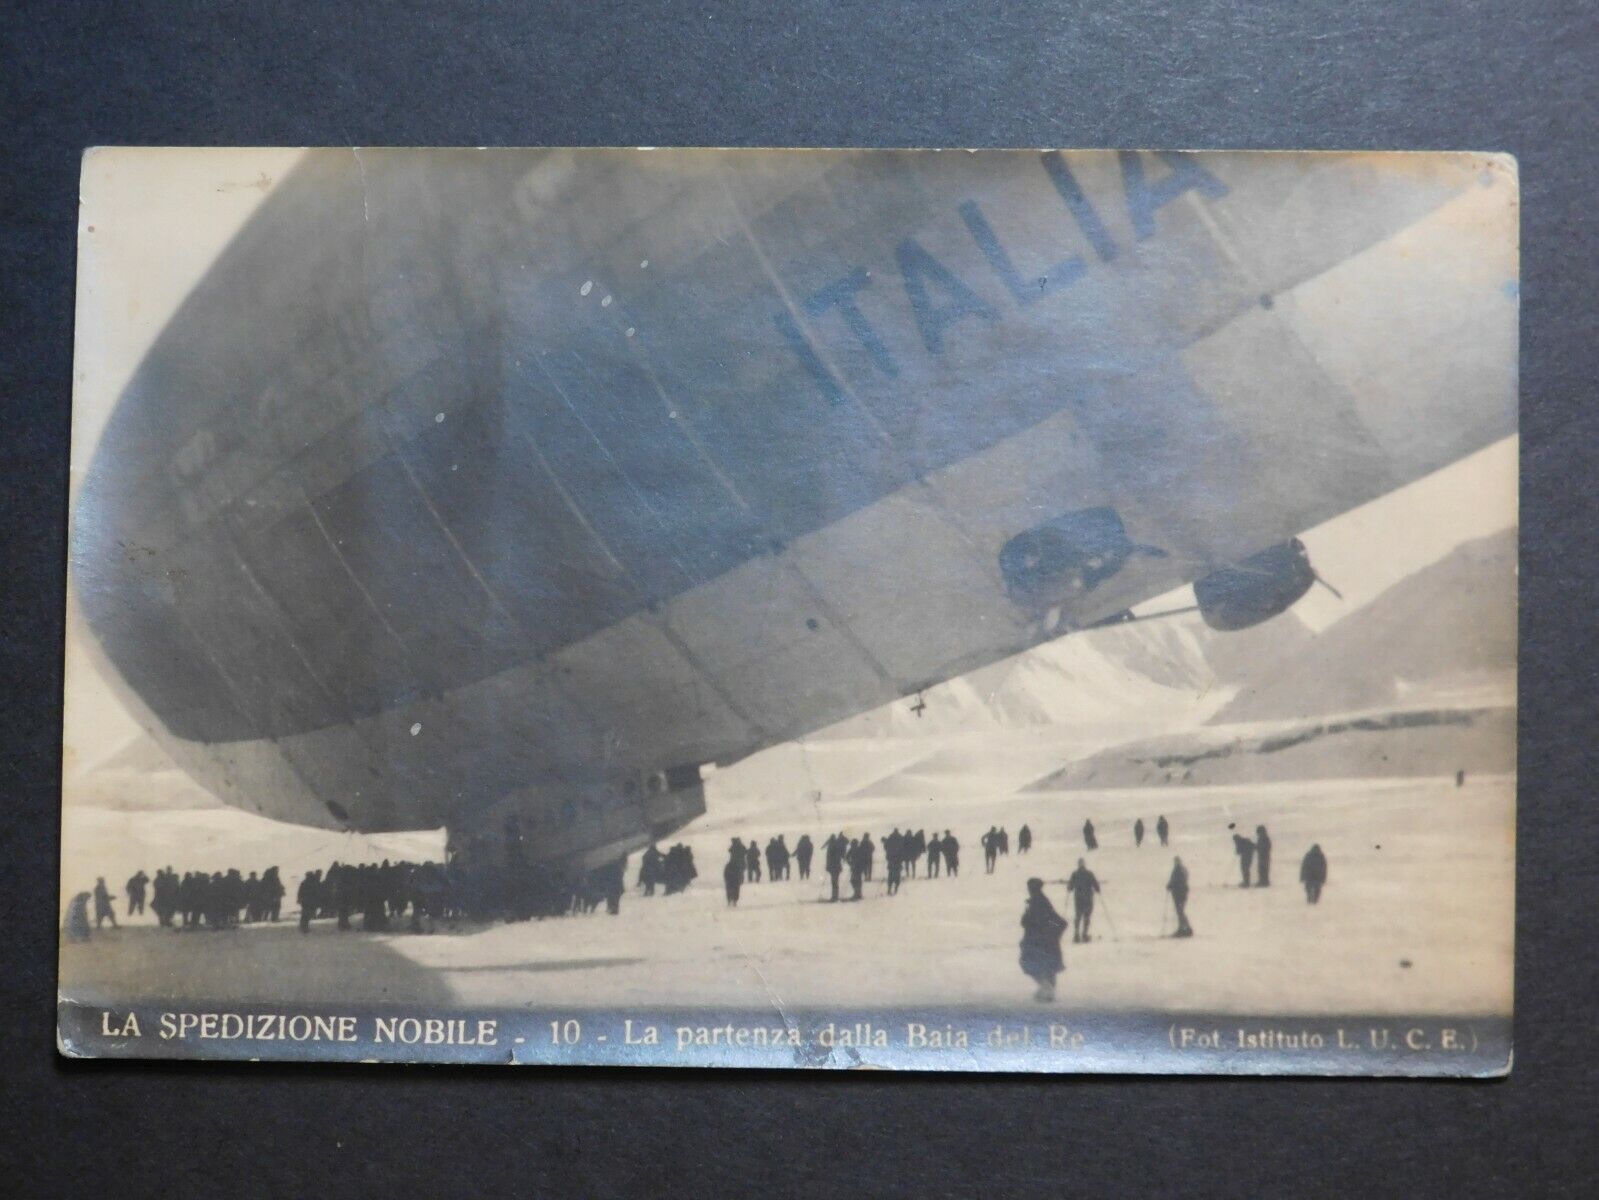 Mint Italy Real Picture Postcard Italia Zeppelin Nobile expedition to North Pole